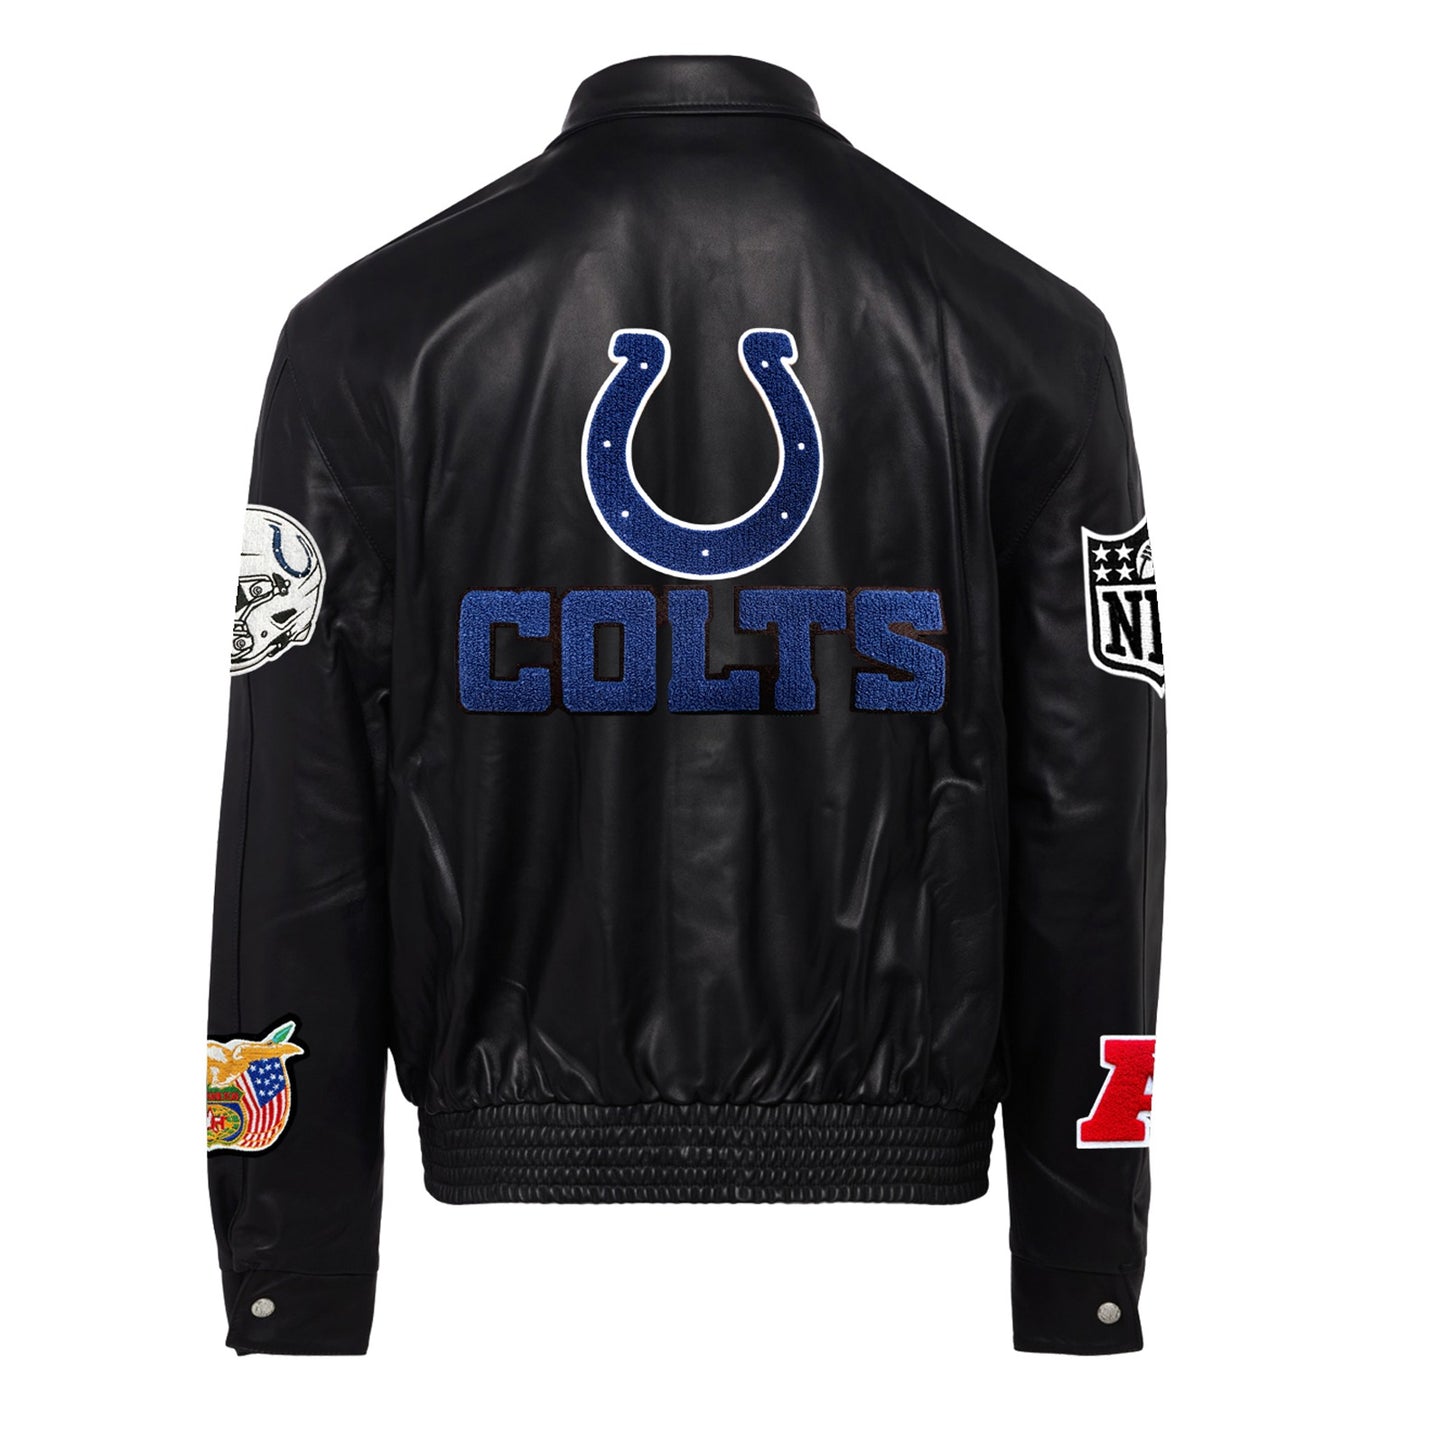 INDIANAPOLIS COLTS FULL LEATHER JACKET Black